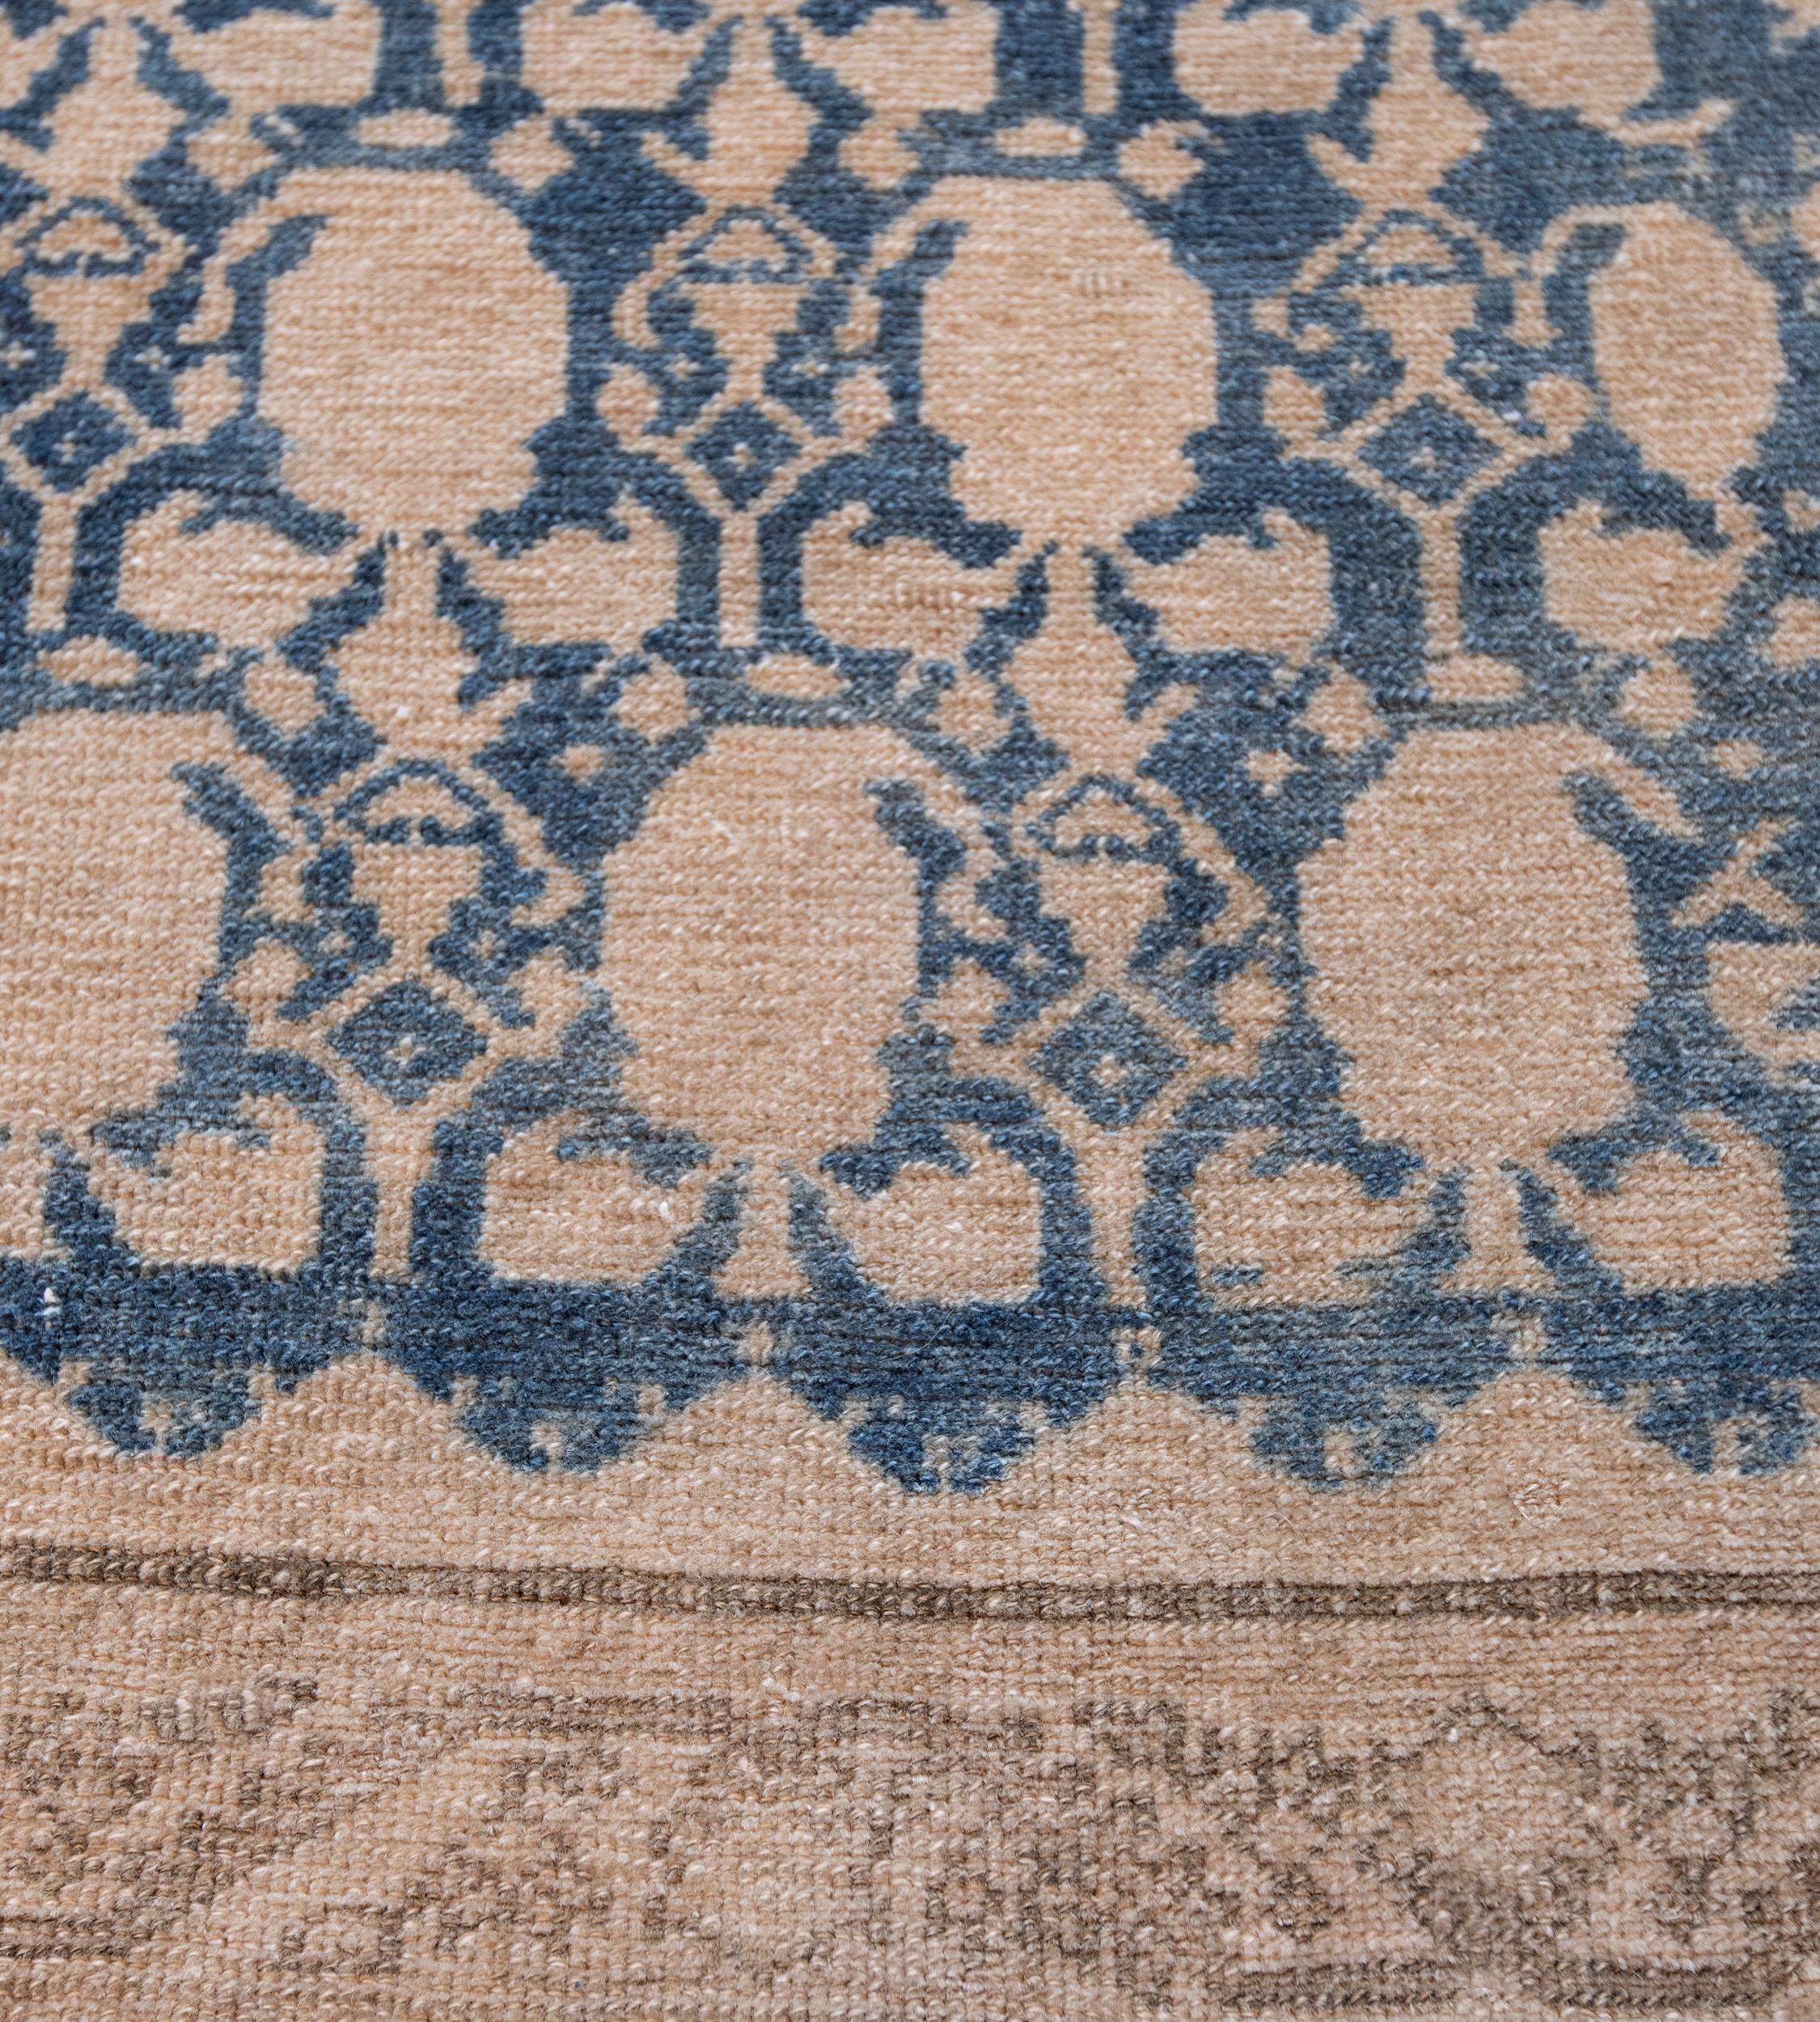 This Malayer rug has a deep indigo-blue field with an overall design of linked buff-brown angular vine linking floral boteh, in a buff-brown border of angular fox-brown meandering serrated leaf vine issuing flowerheads between minor fox-brown